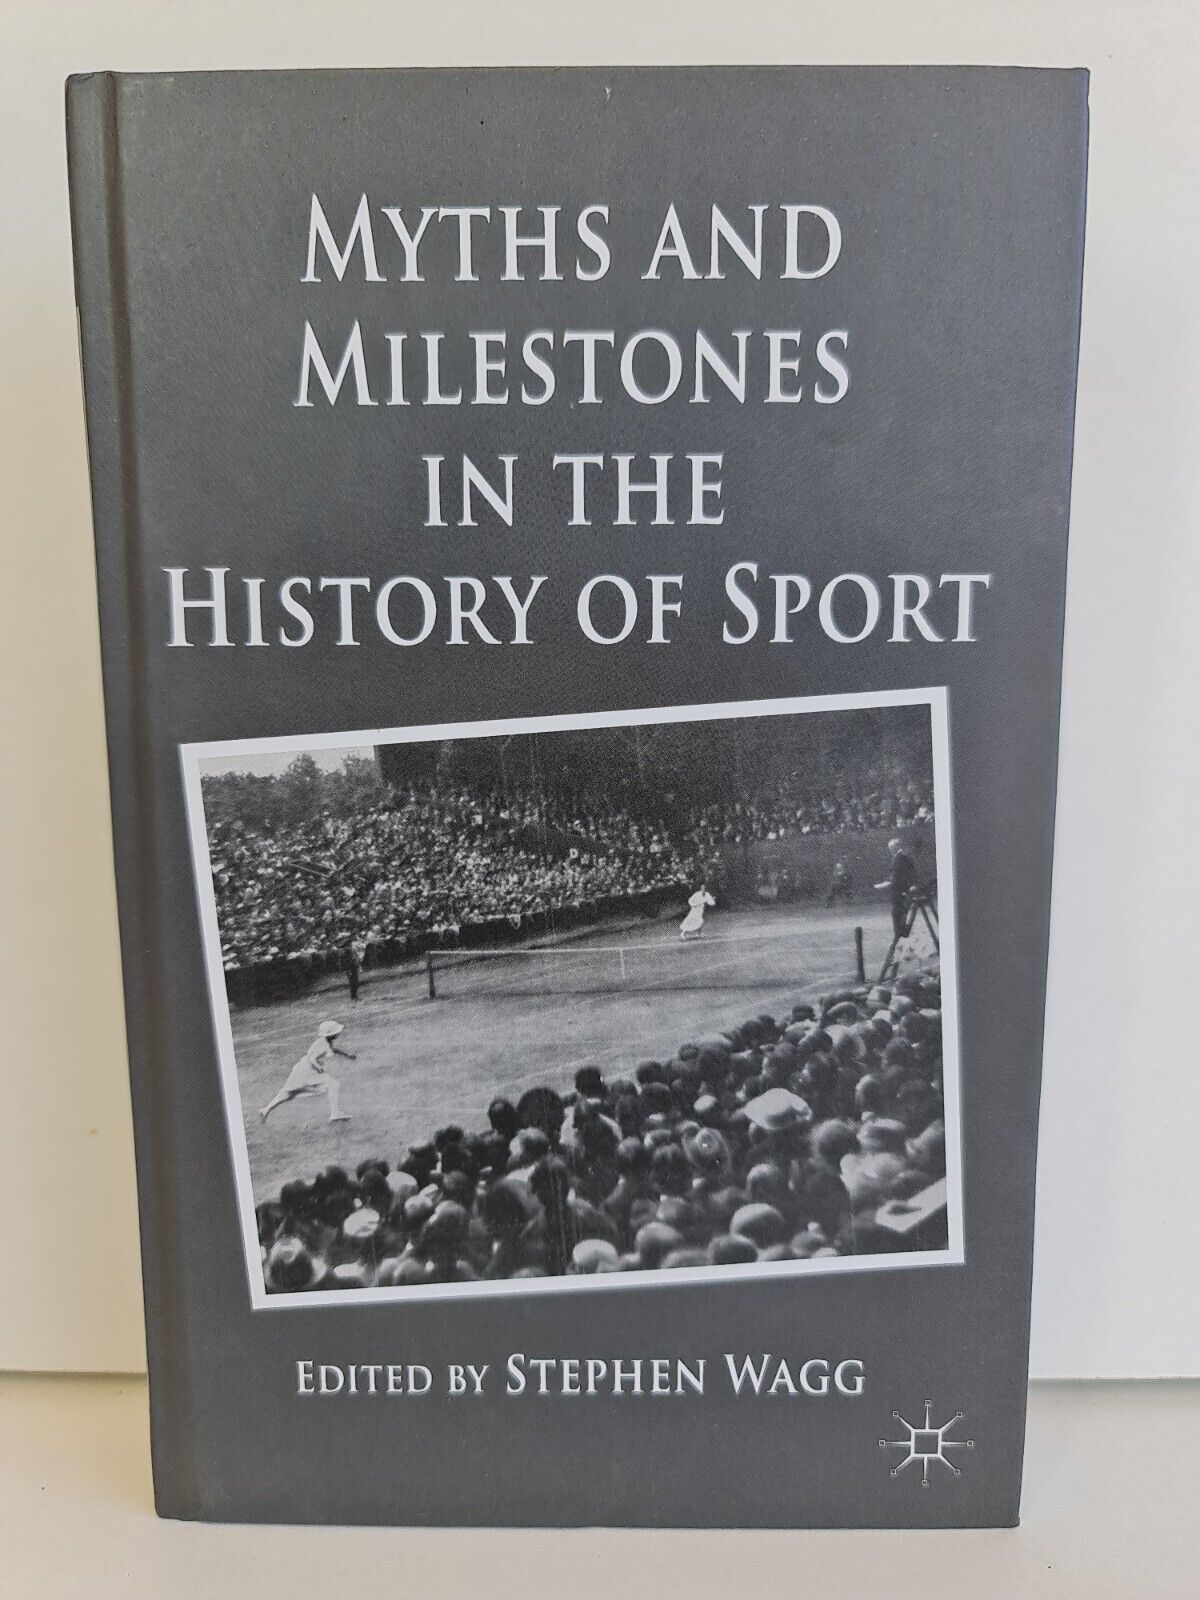 Myths and Milestones in the History of Sport by Stephen Wagg